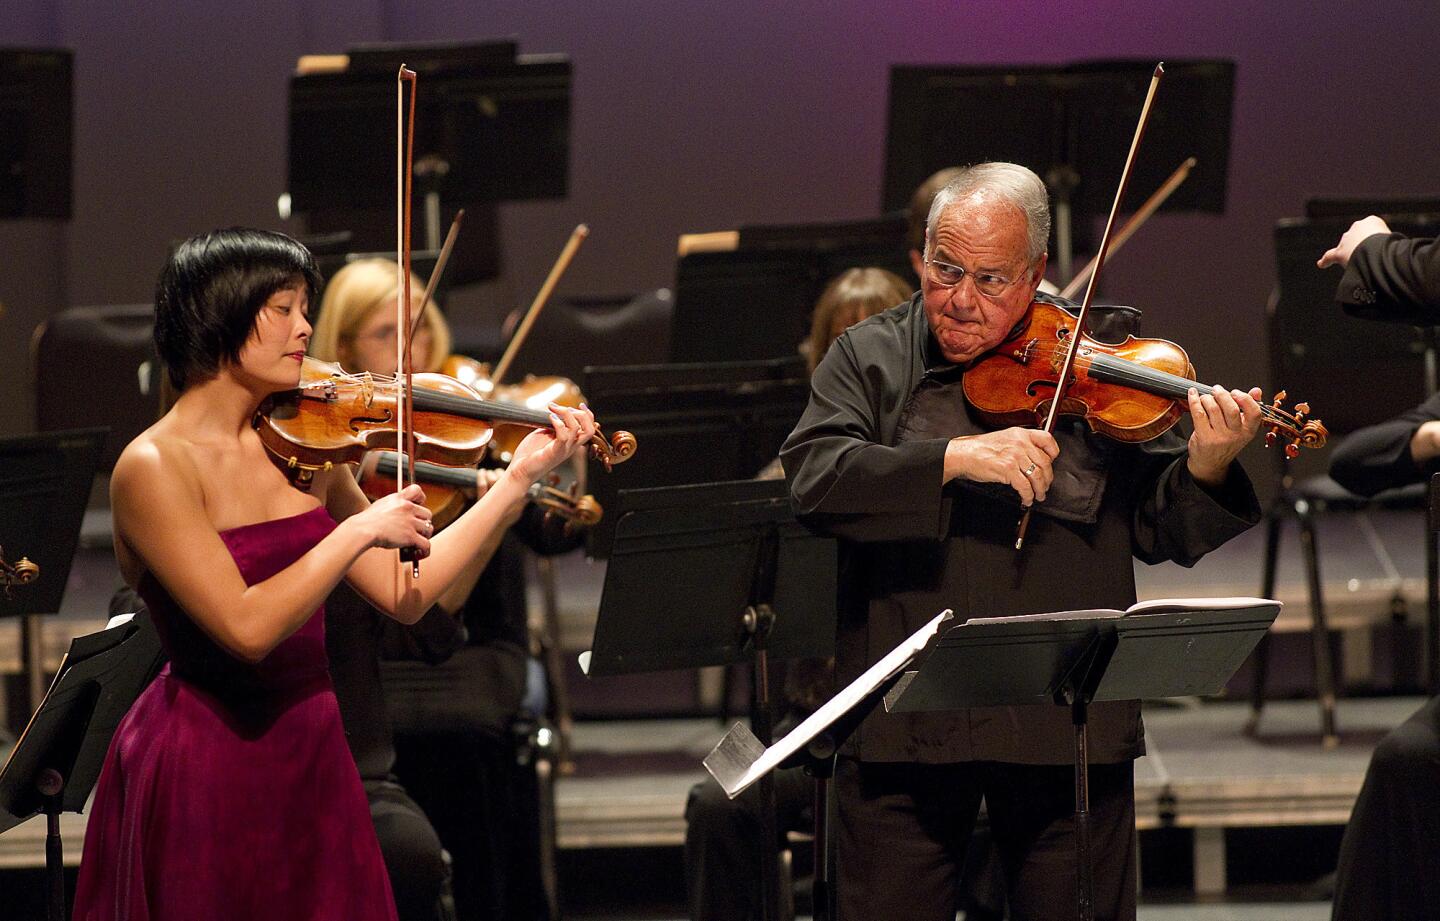 Violinists Jennifer Koh, left, and Jaime Laredo, right, perform Anna Clyne's "Prince of Clouds" with the Los Angeles Chamber Orchestra at the Alex Theatre.